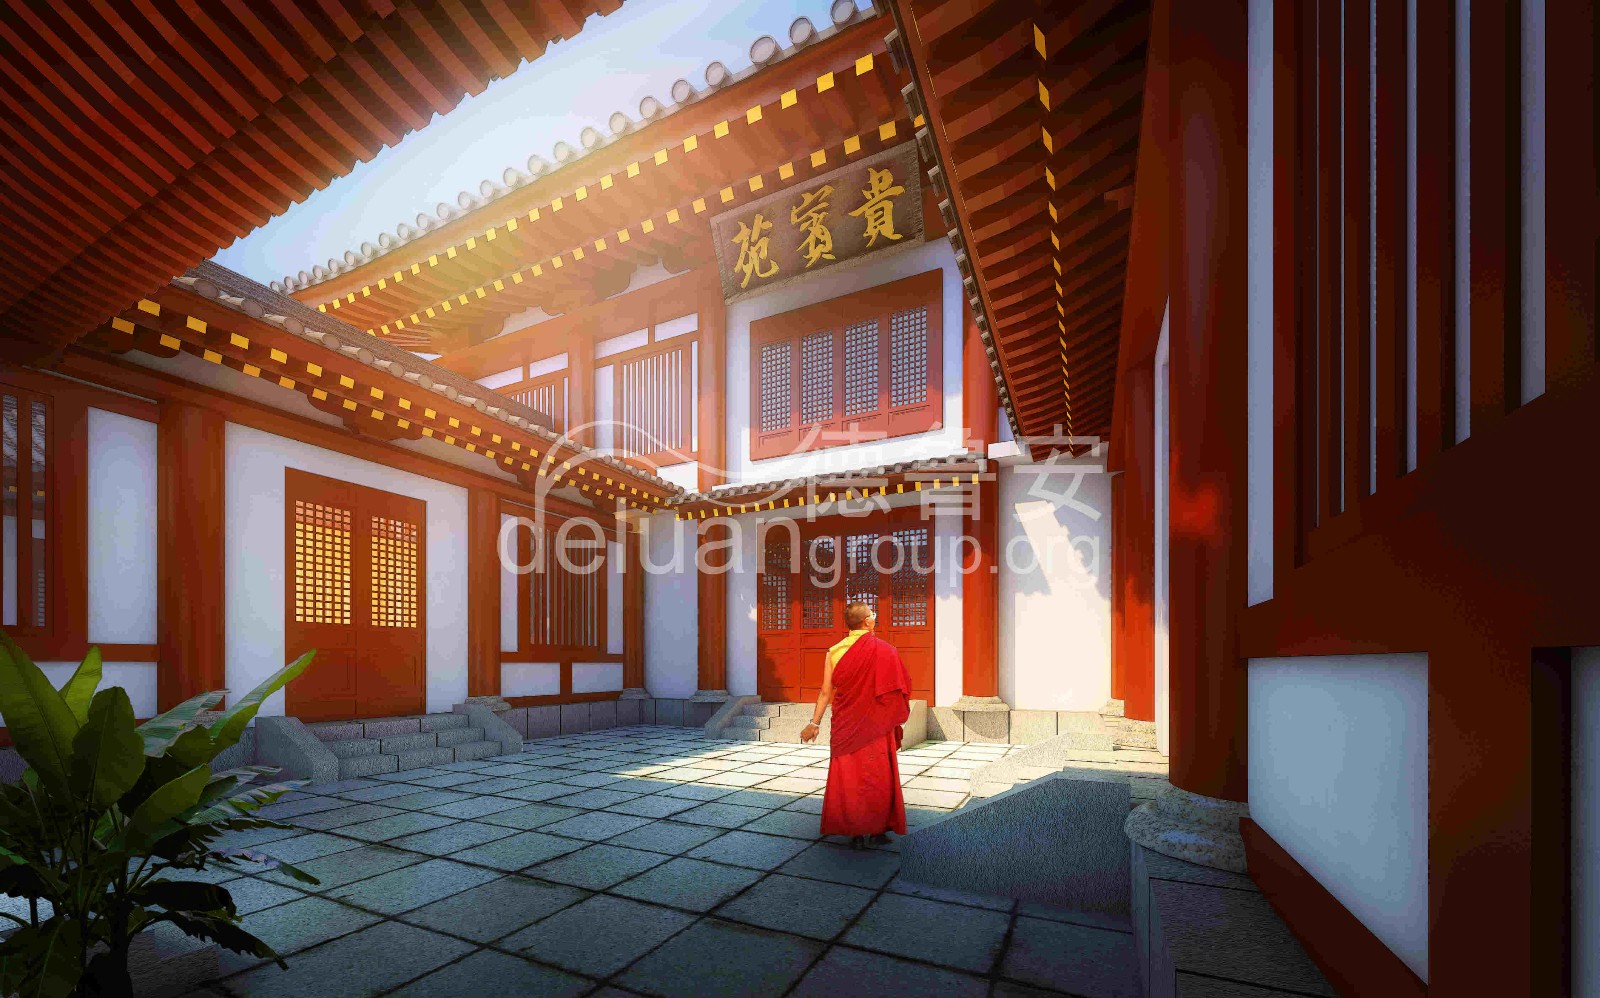 Planning and design of Baoqing temple in Xianghe(图27)